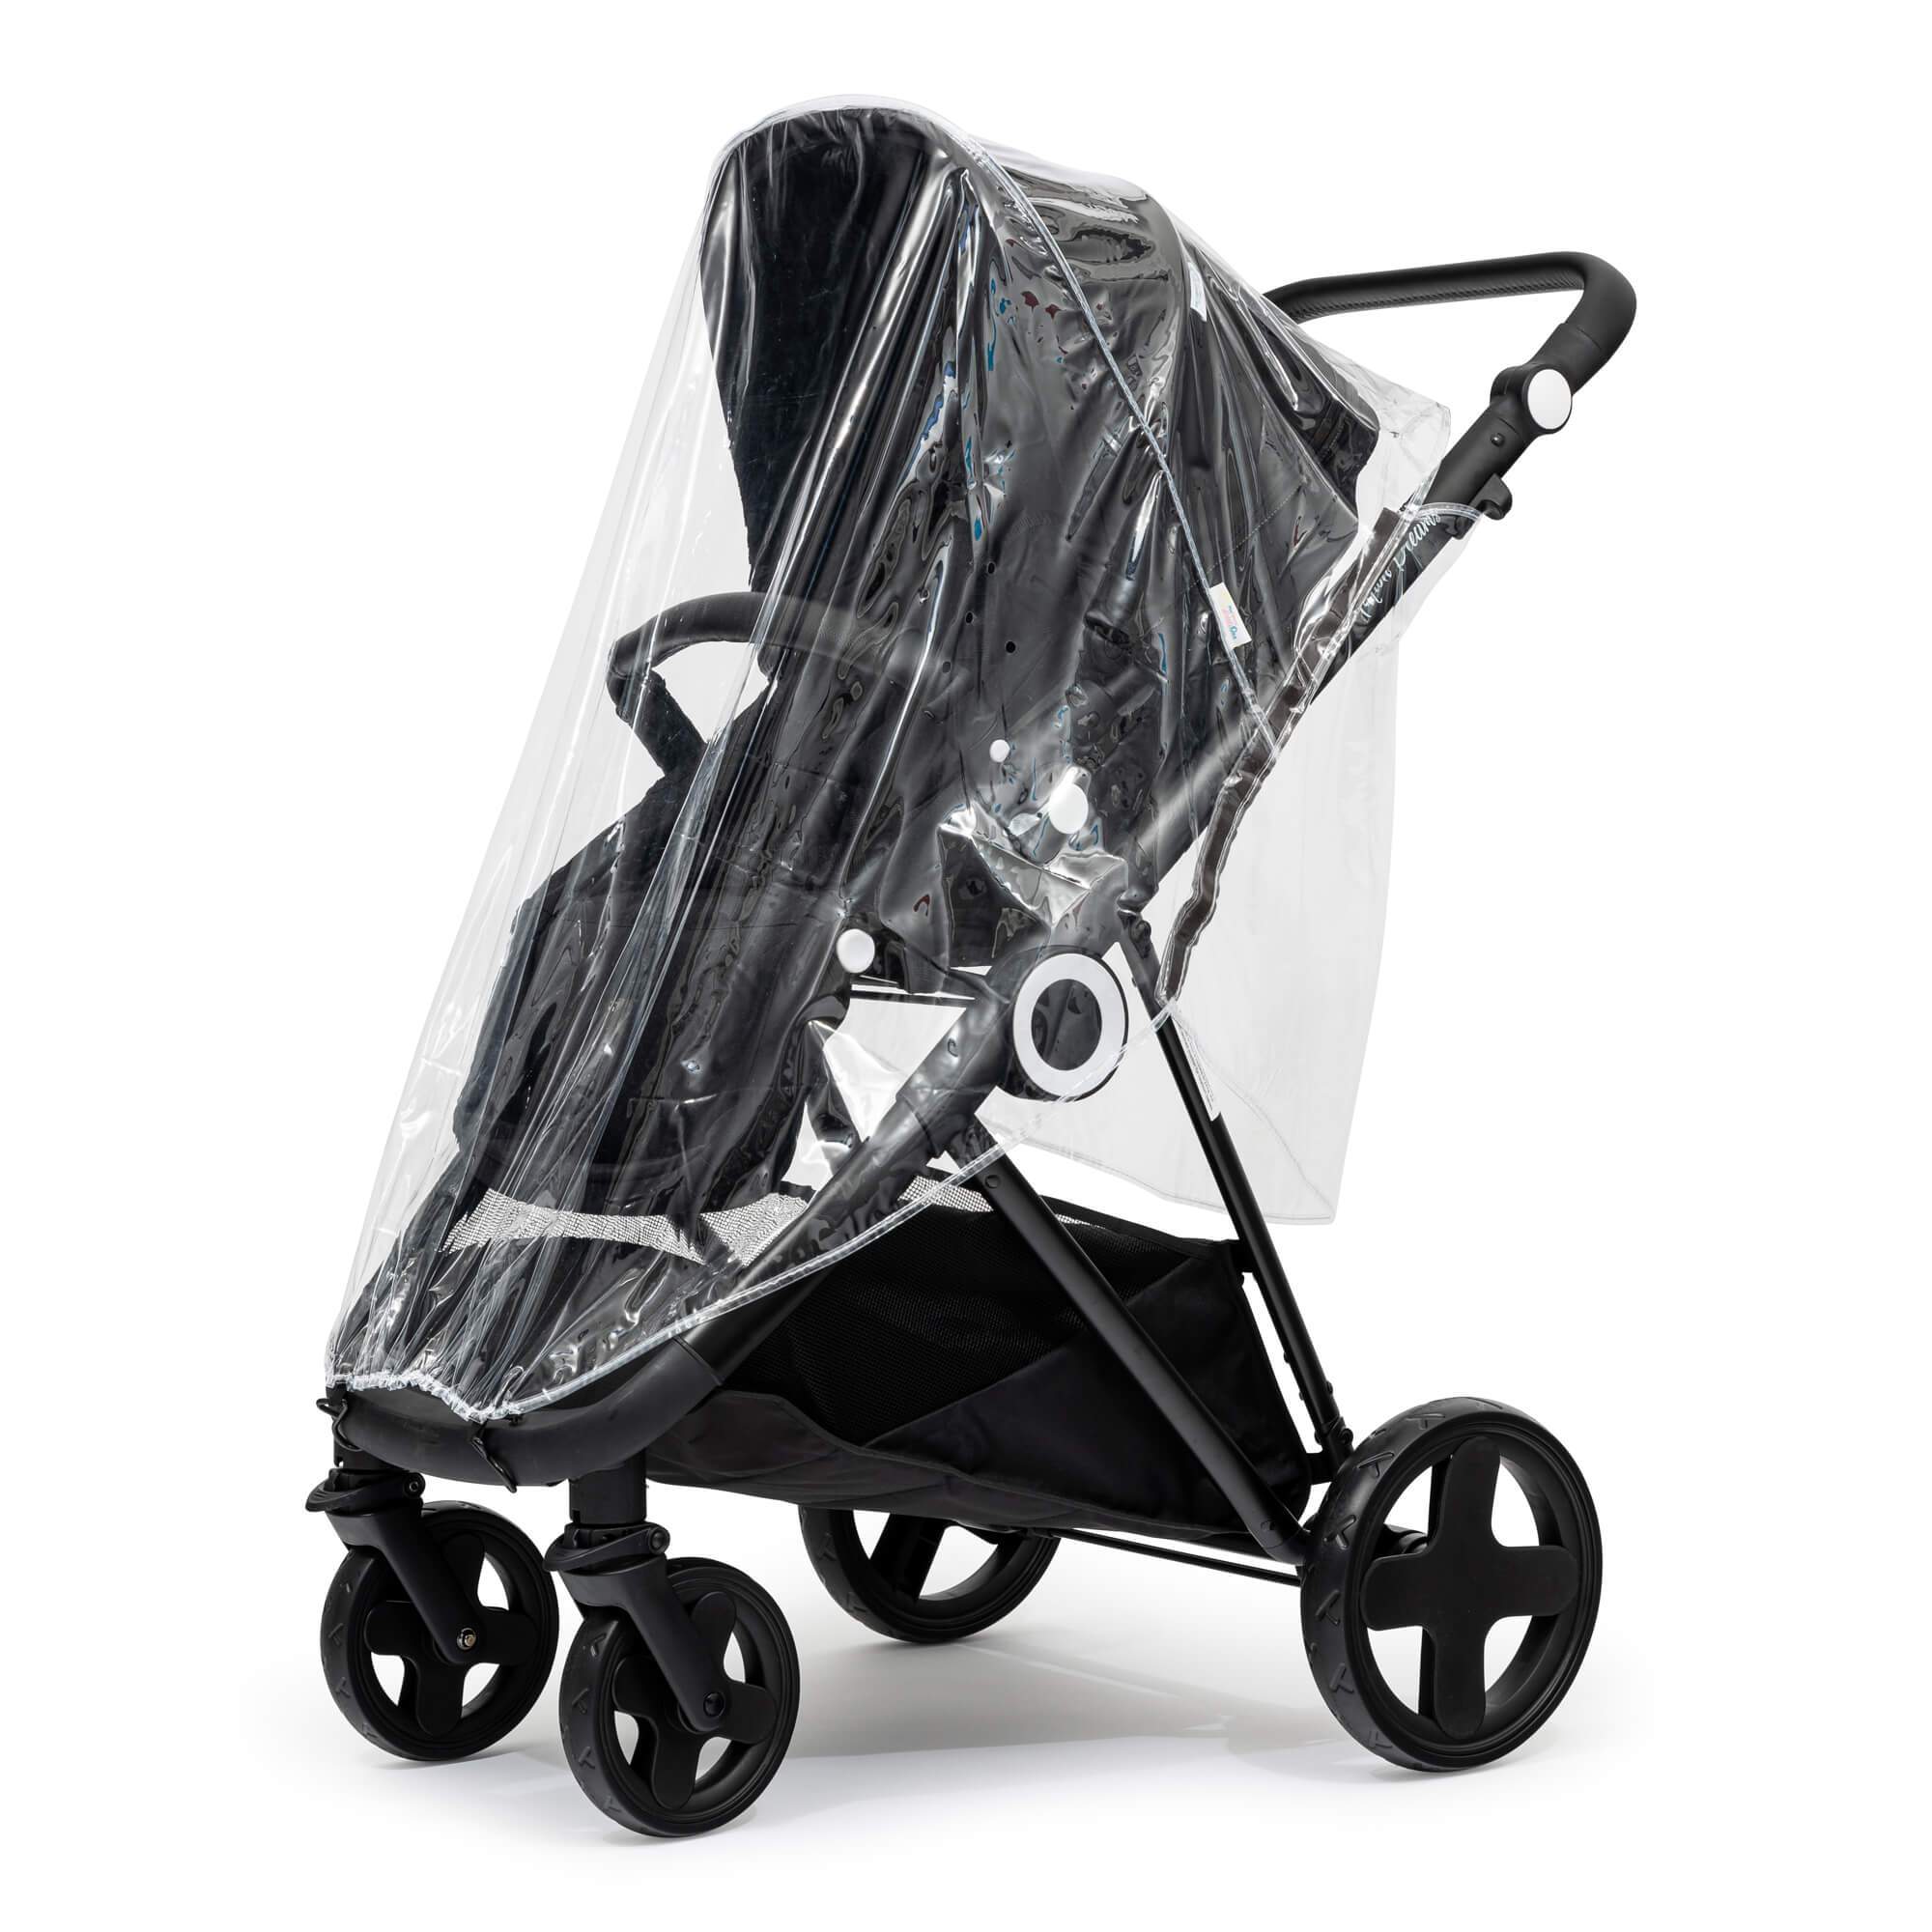 Pushchair Raincover Compatible With Hybrid - For Your Little One